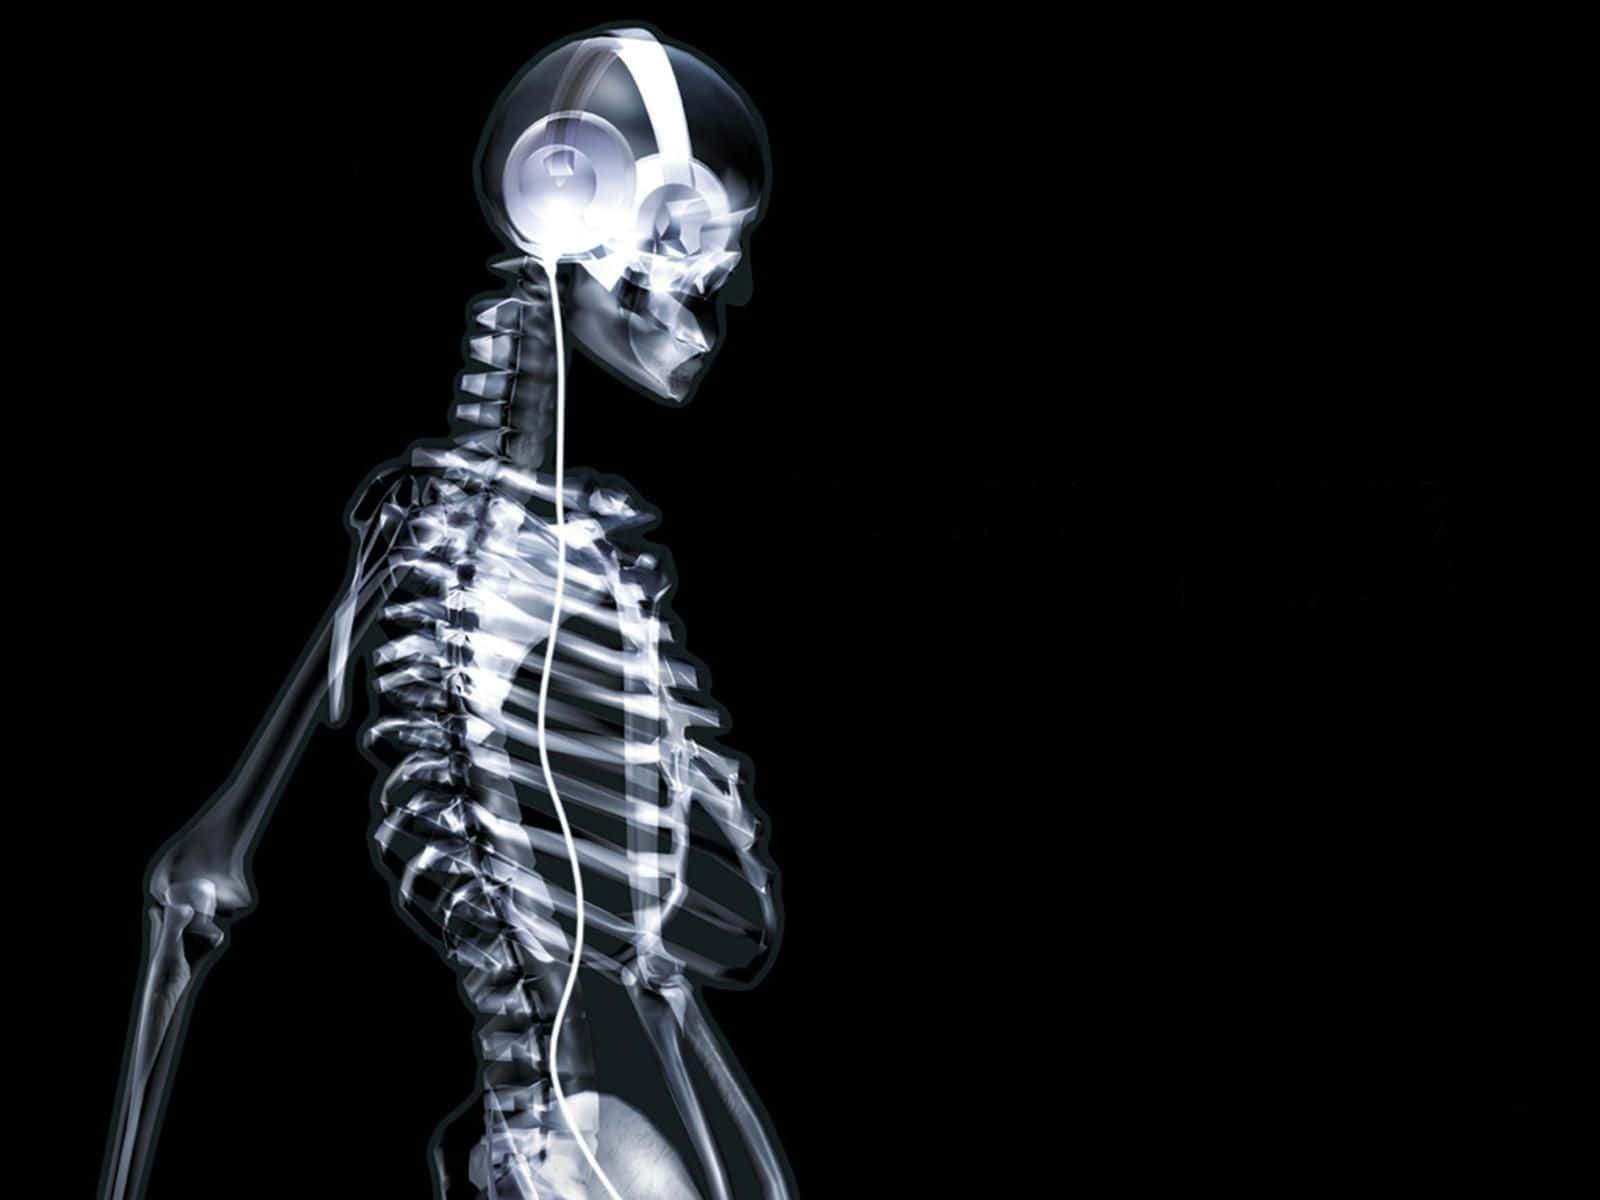 A Skeleton With Headphones On Is Standing On A Black Background Wallpaper